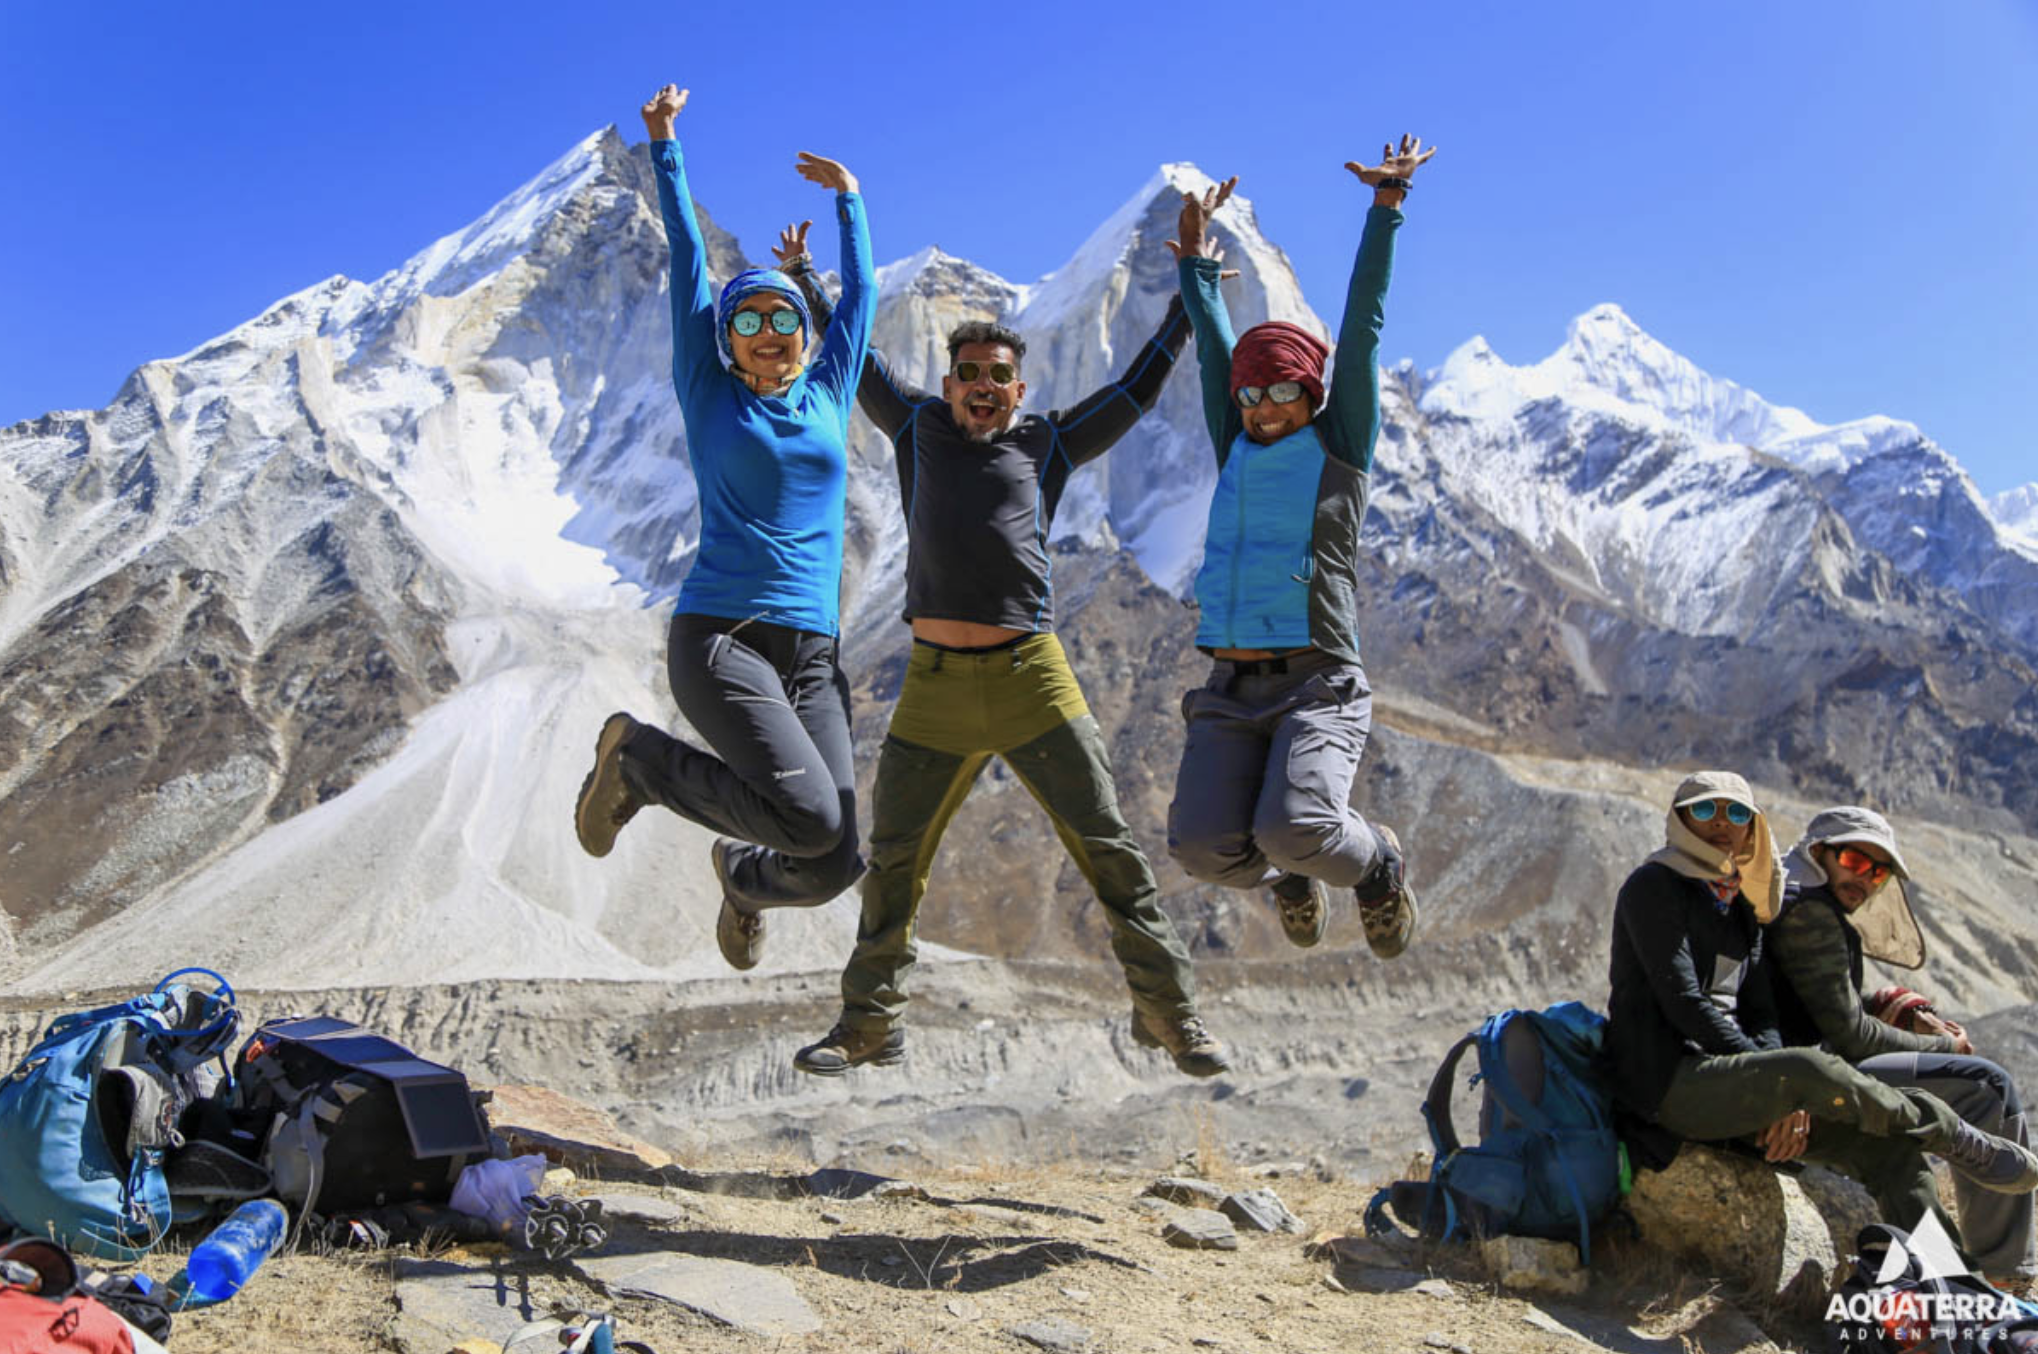 hikers jumping up in the air, mountains in the background